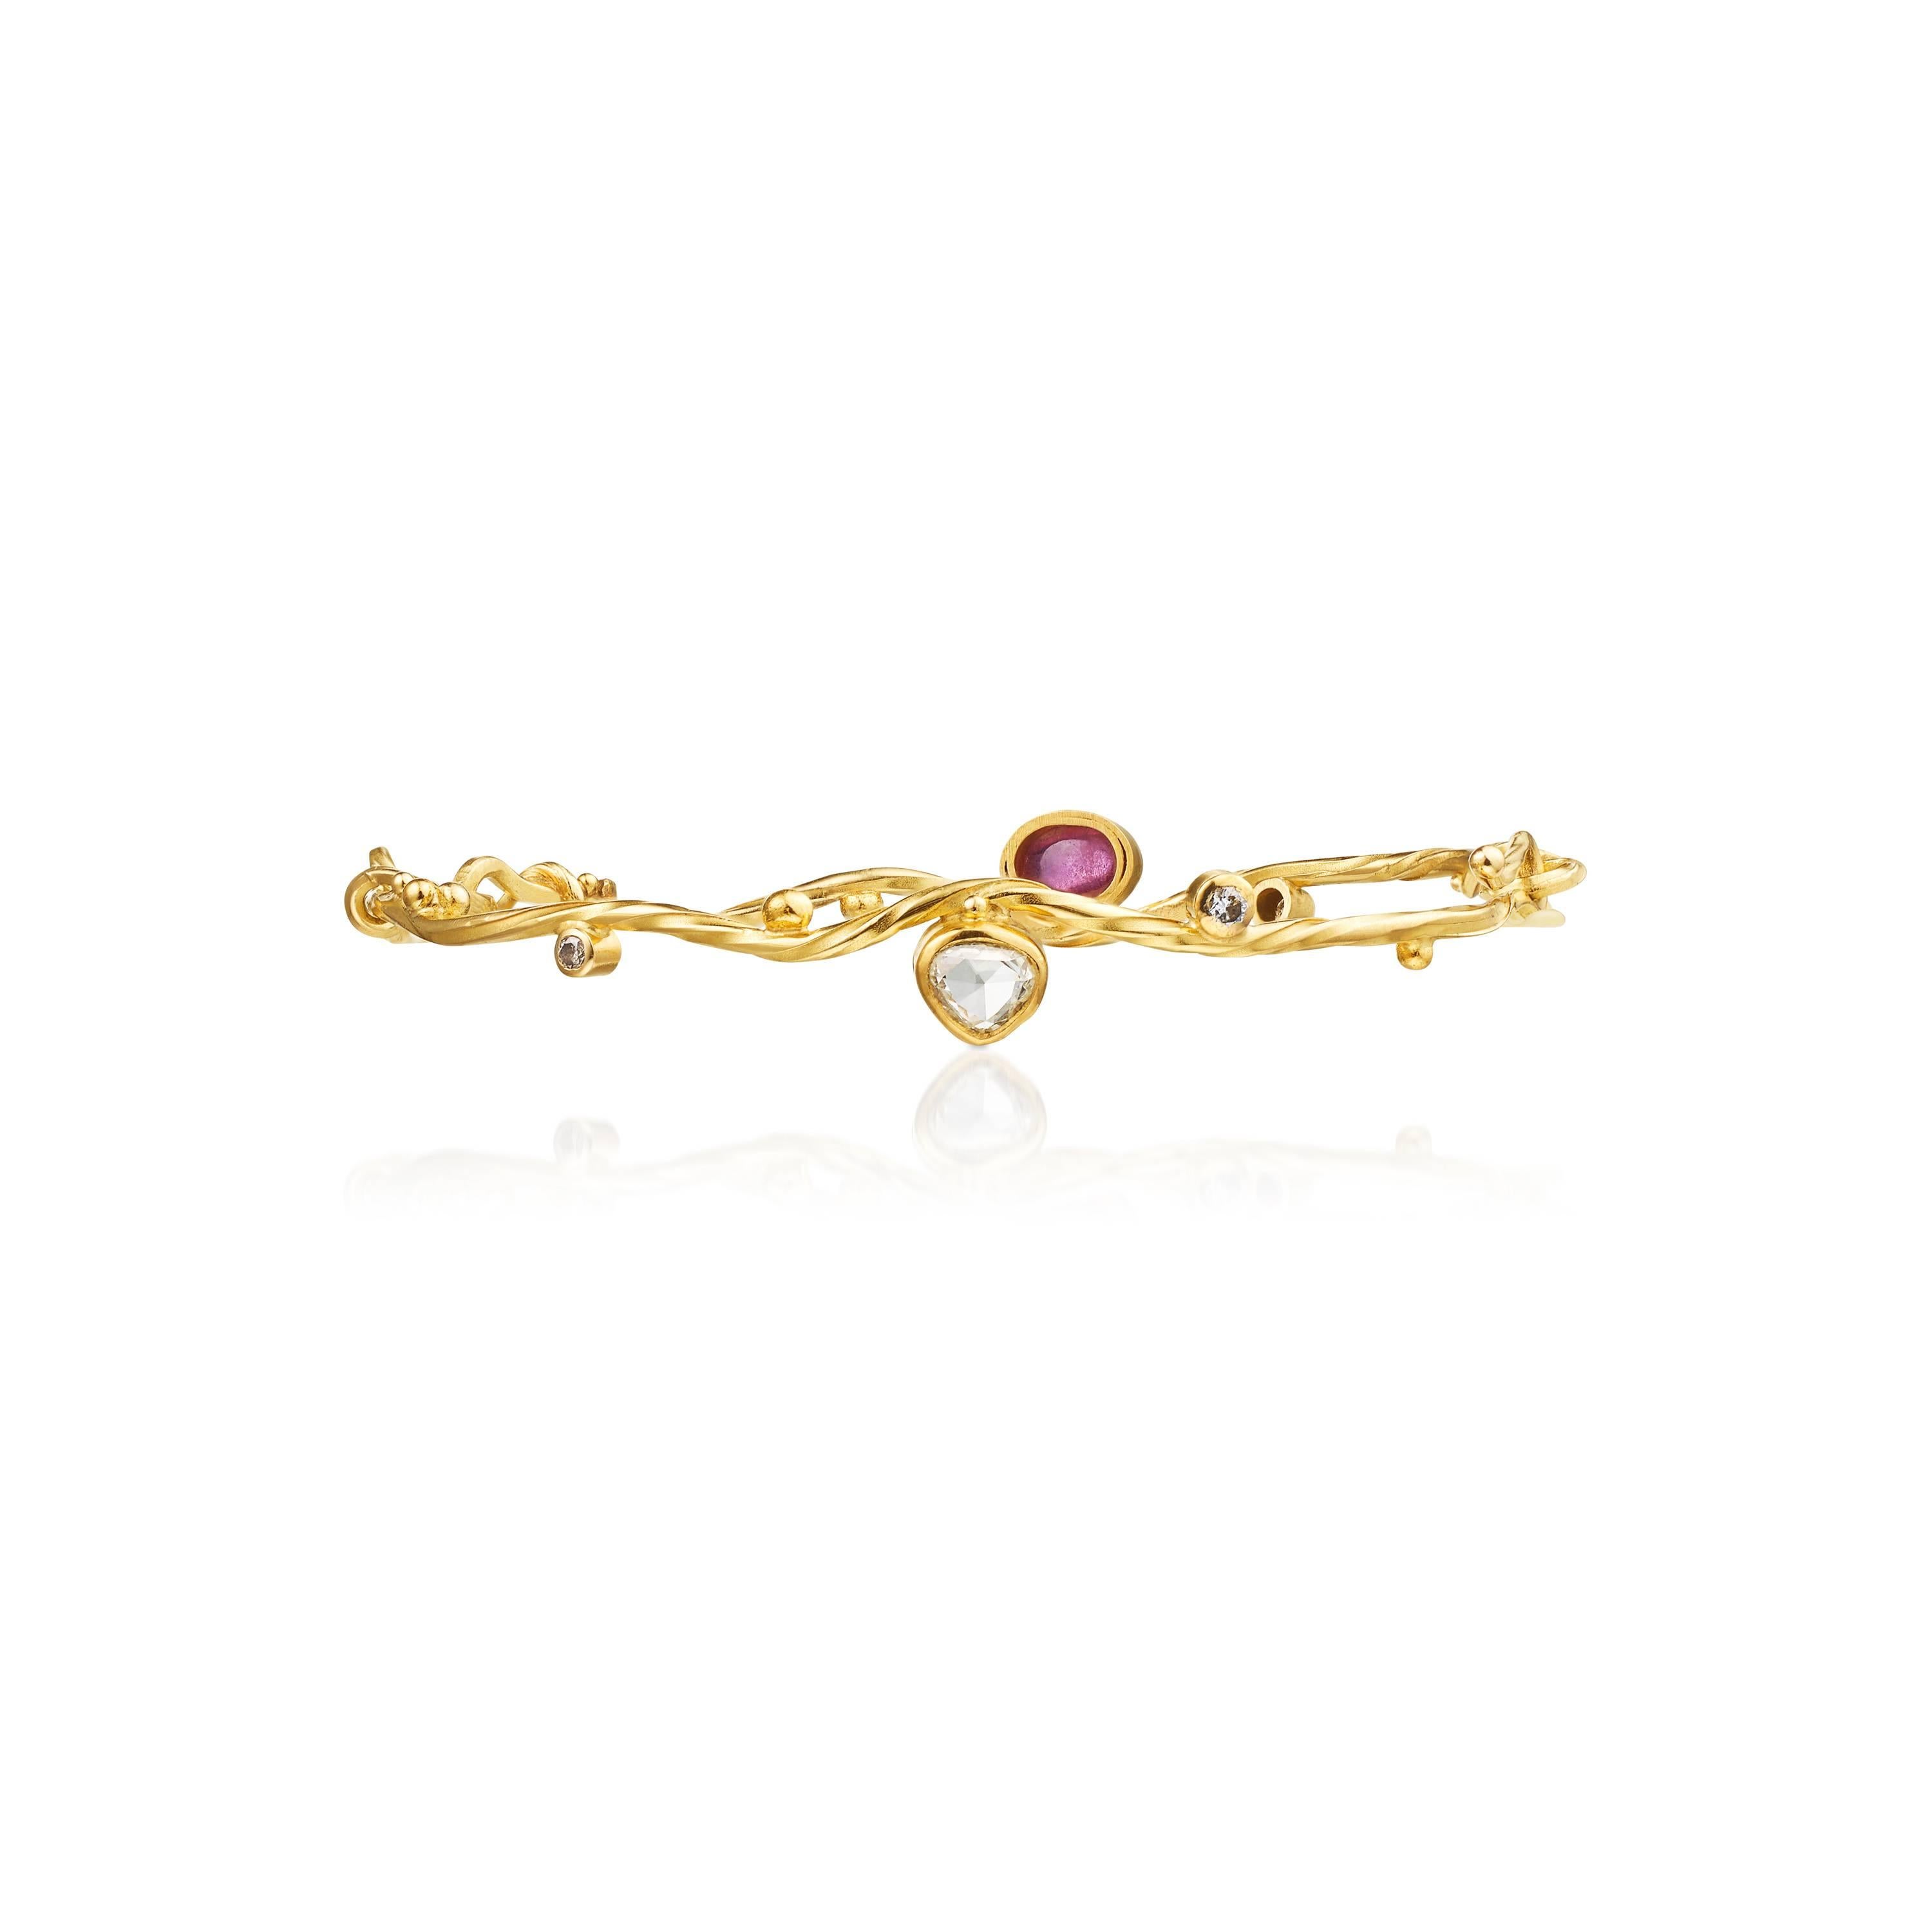 This beautiful seafire bracelet brings memory of the flourishing phlankton in the Oceans. Brought to life by movements in the surface.  
It is made in 18 and 22 karat yellow gold with a pink sapphire, 0.43 ct. antique cut diamond, 0.04 ct. and 0.06